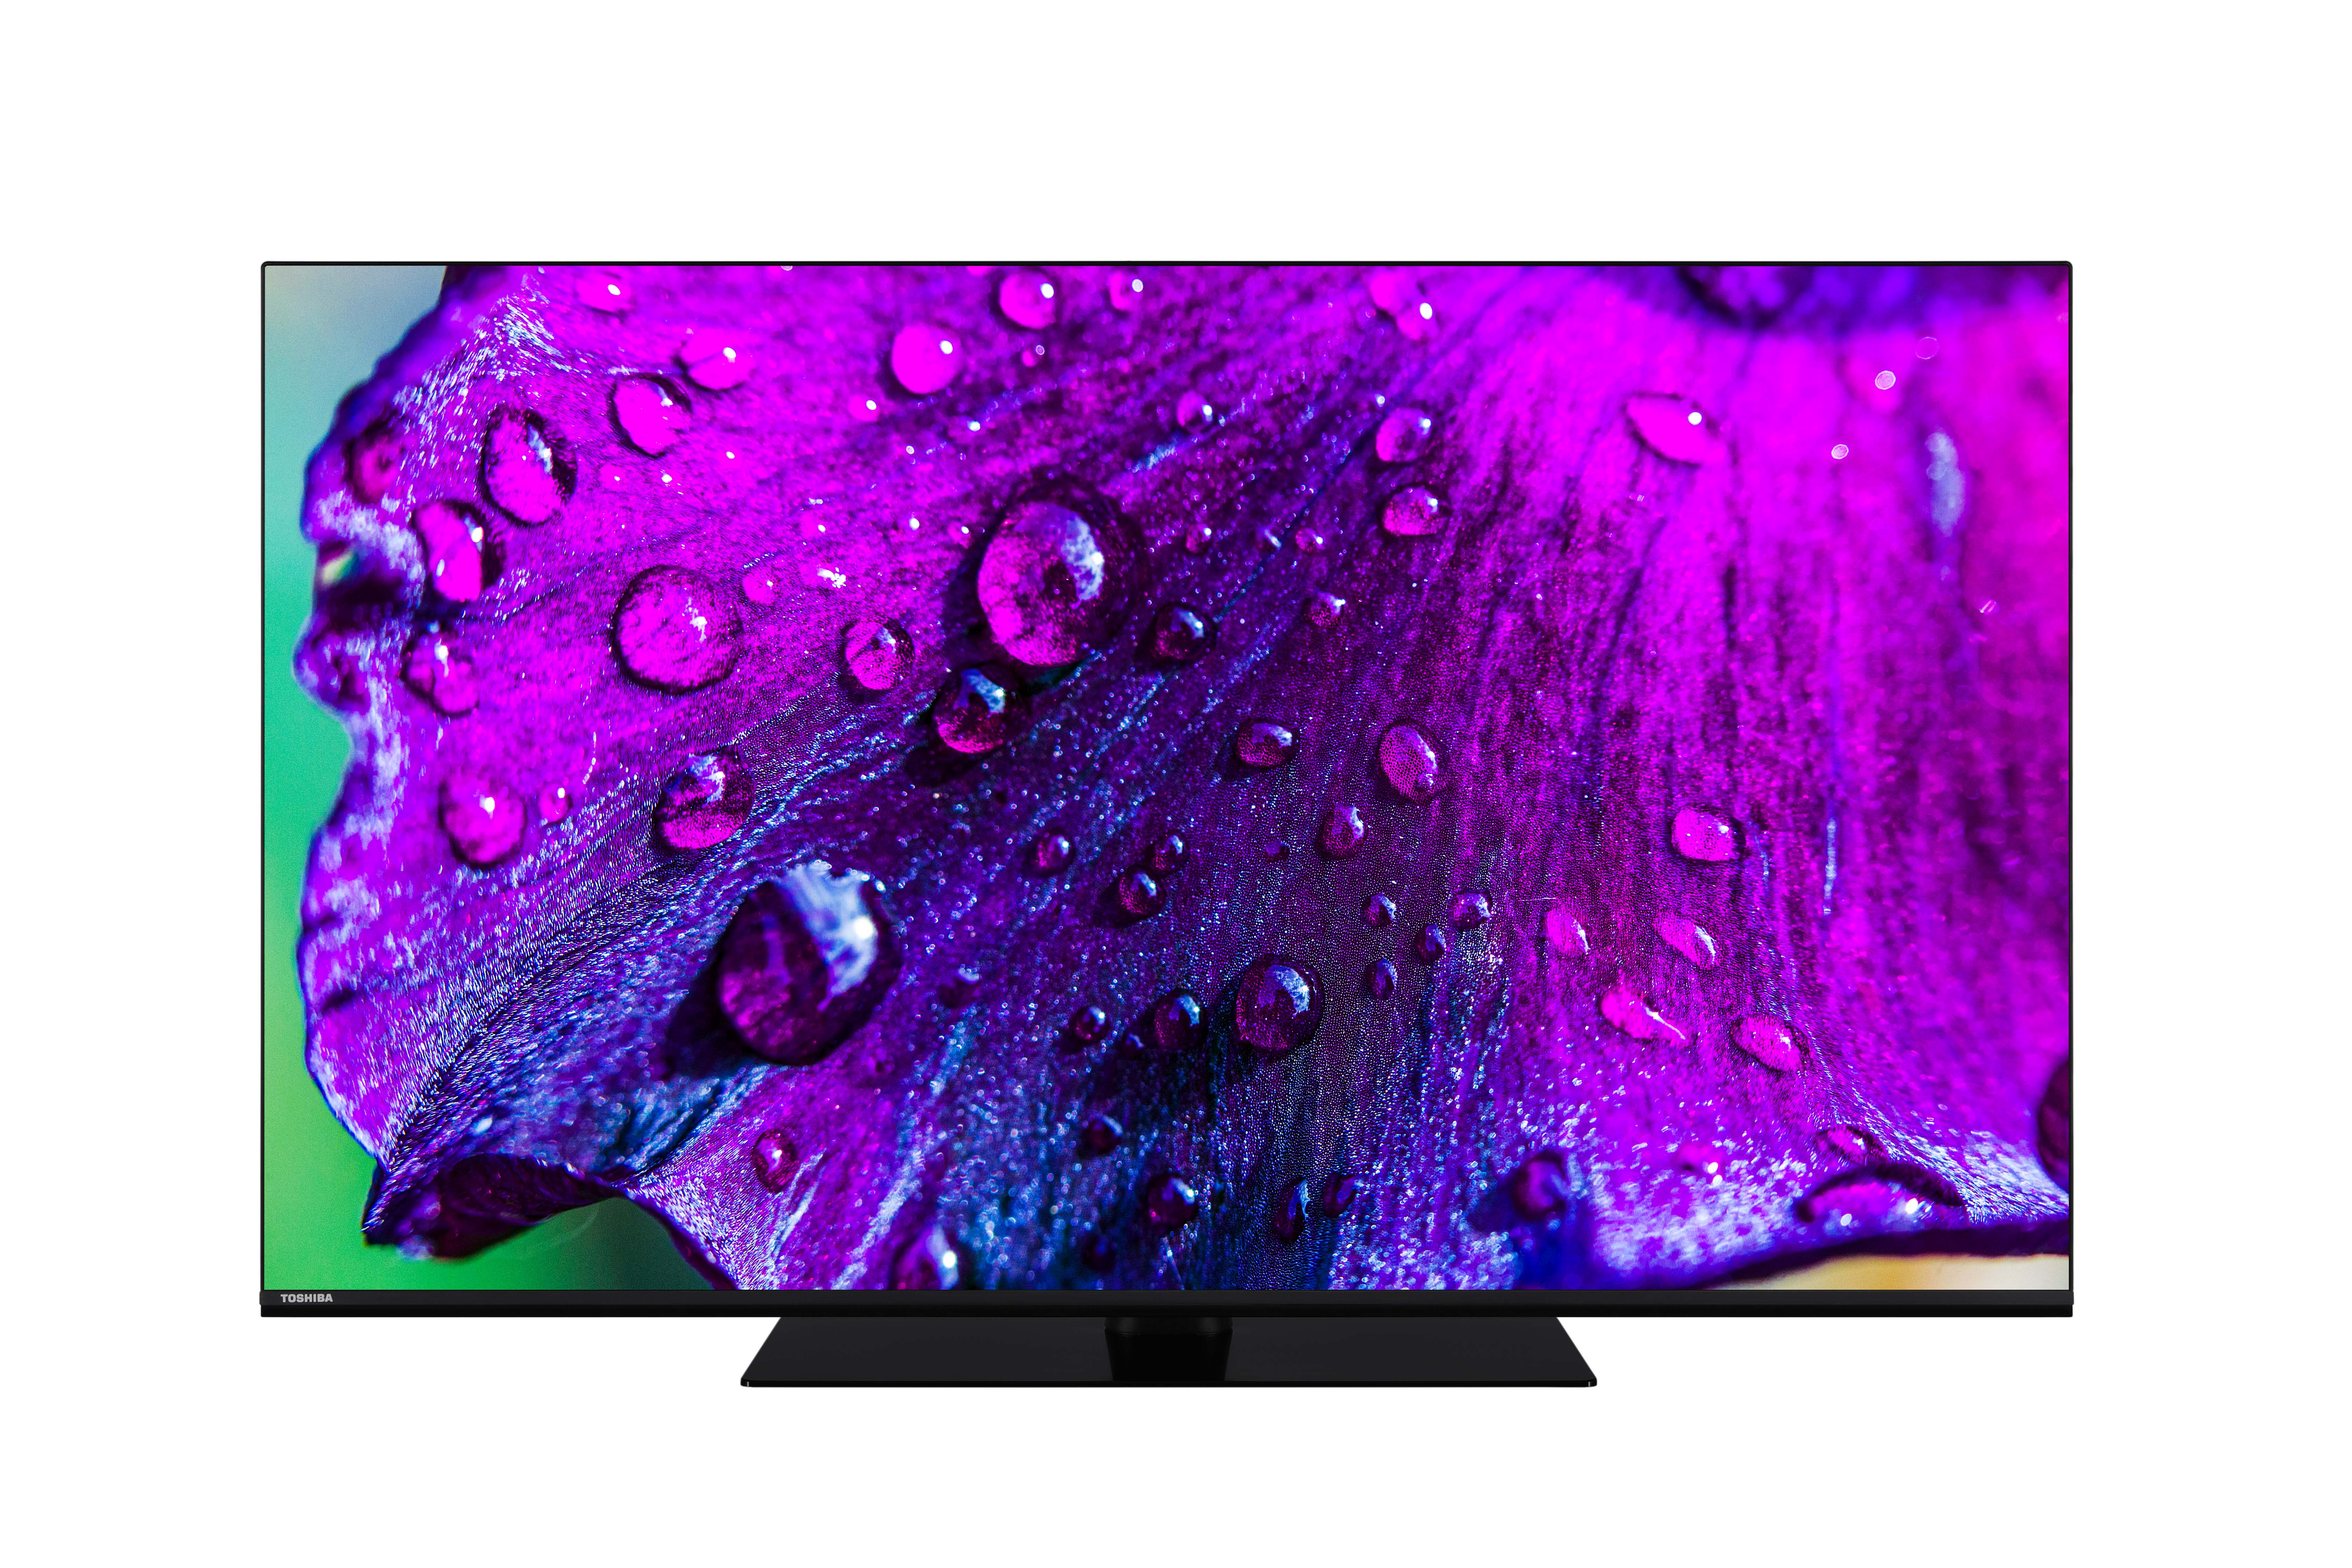 Toshiba: officially presented the new XL9C OLED TVs